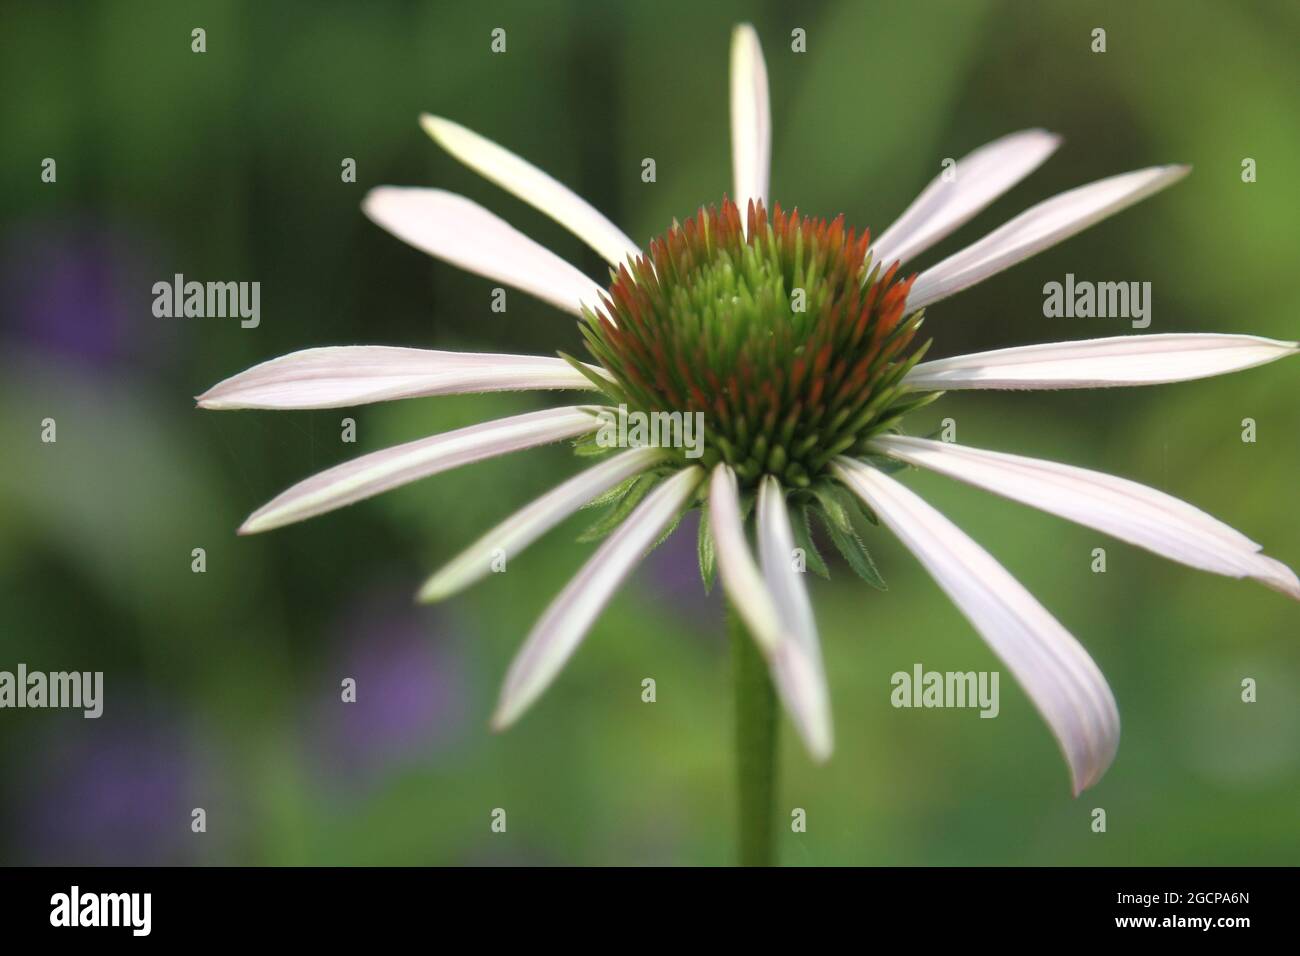 Early stages of echinacea plant growth Stock Photo